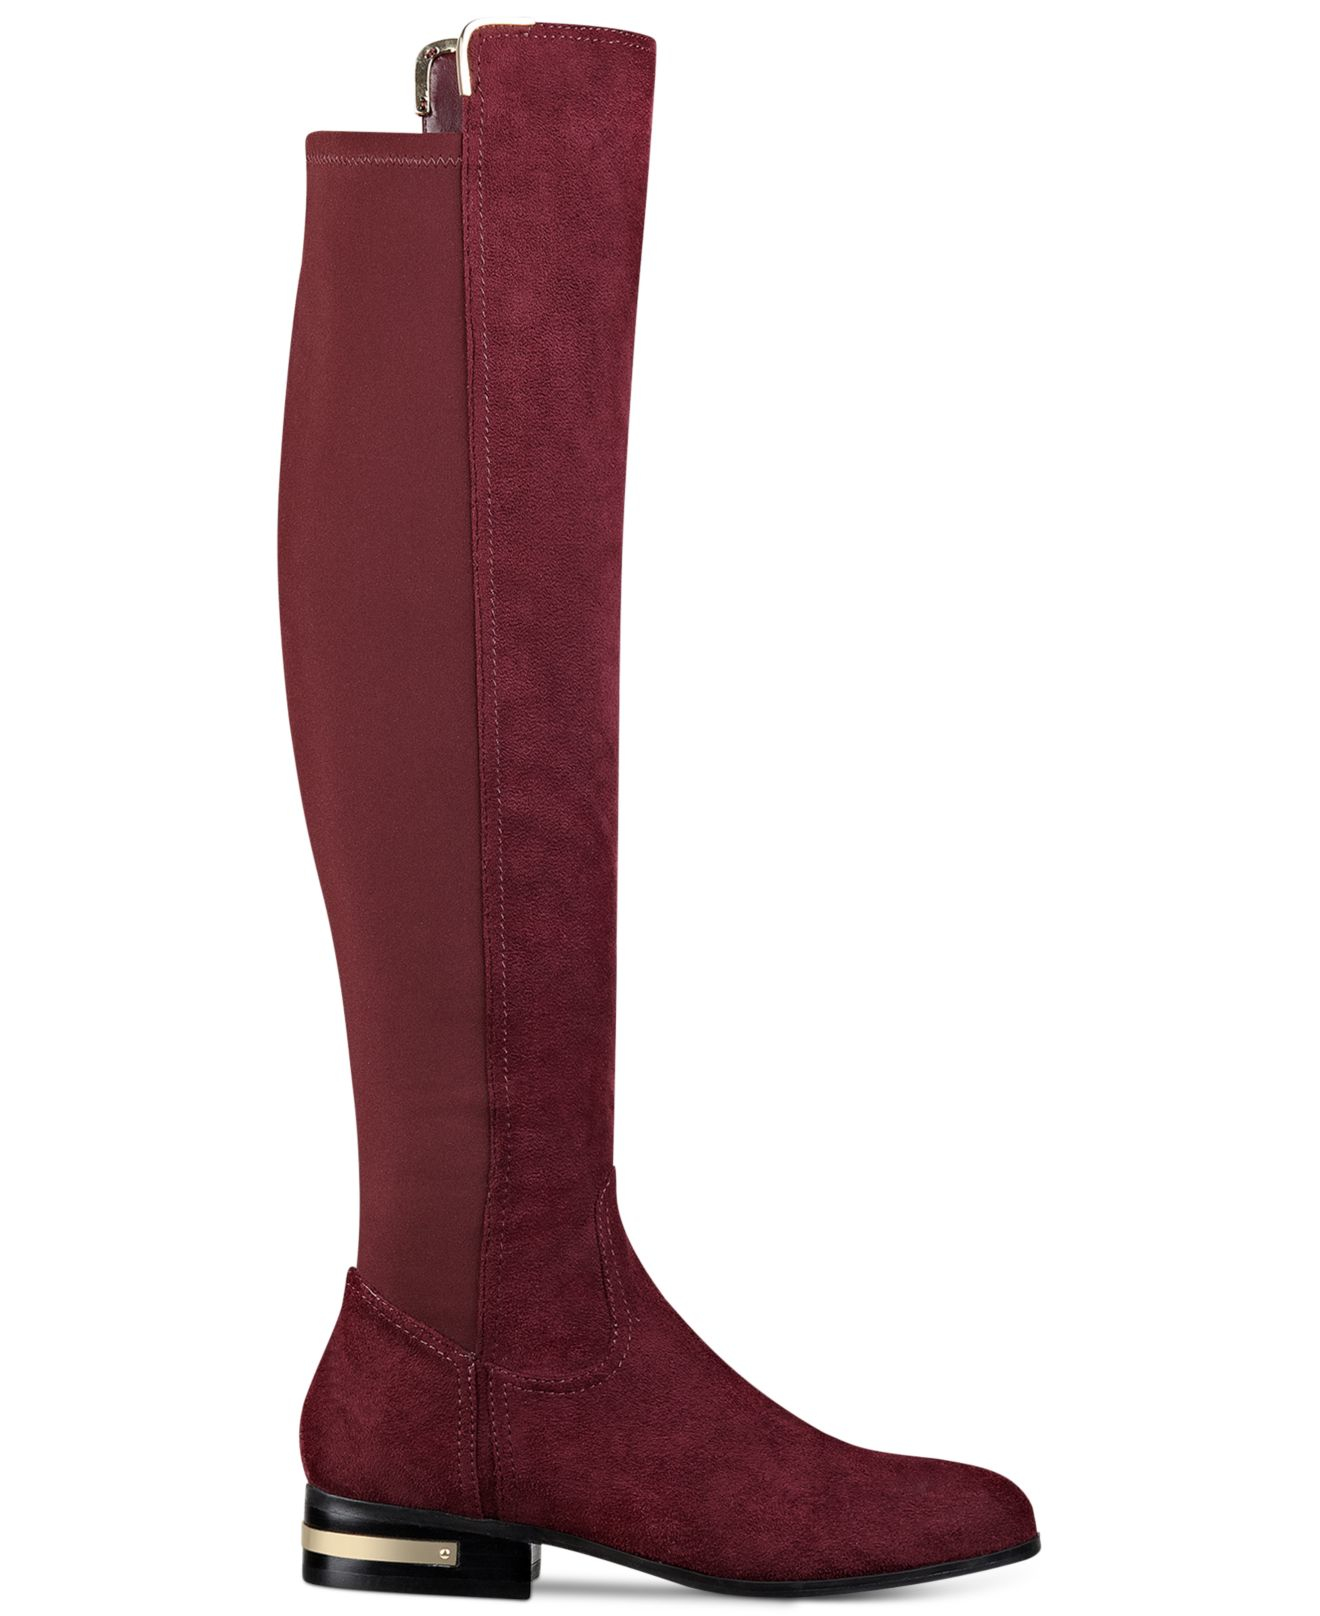 Marc Fisher Pheonix Over-the-knee Boots in Dark Red Suede (Red) - Lyst